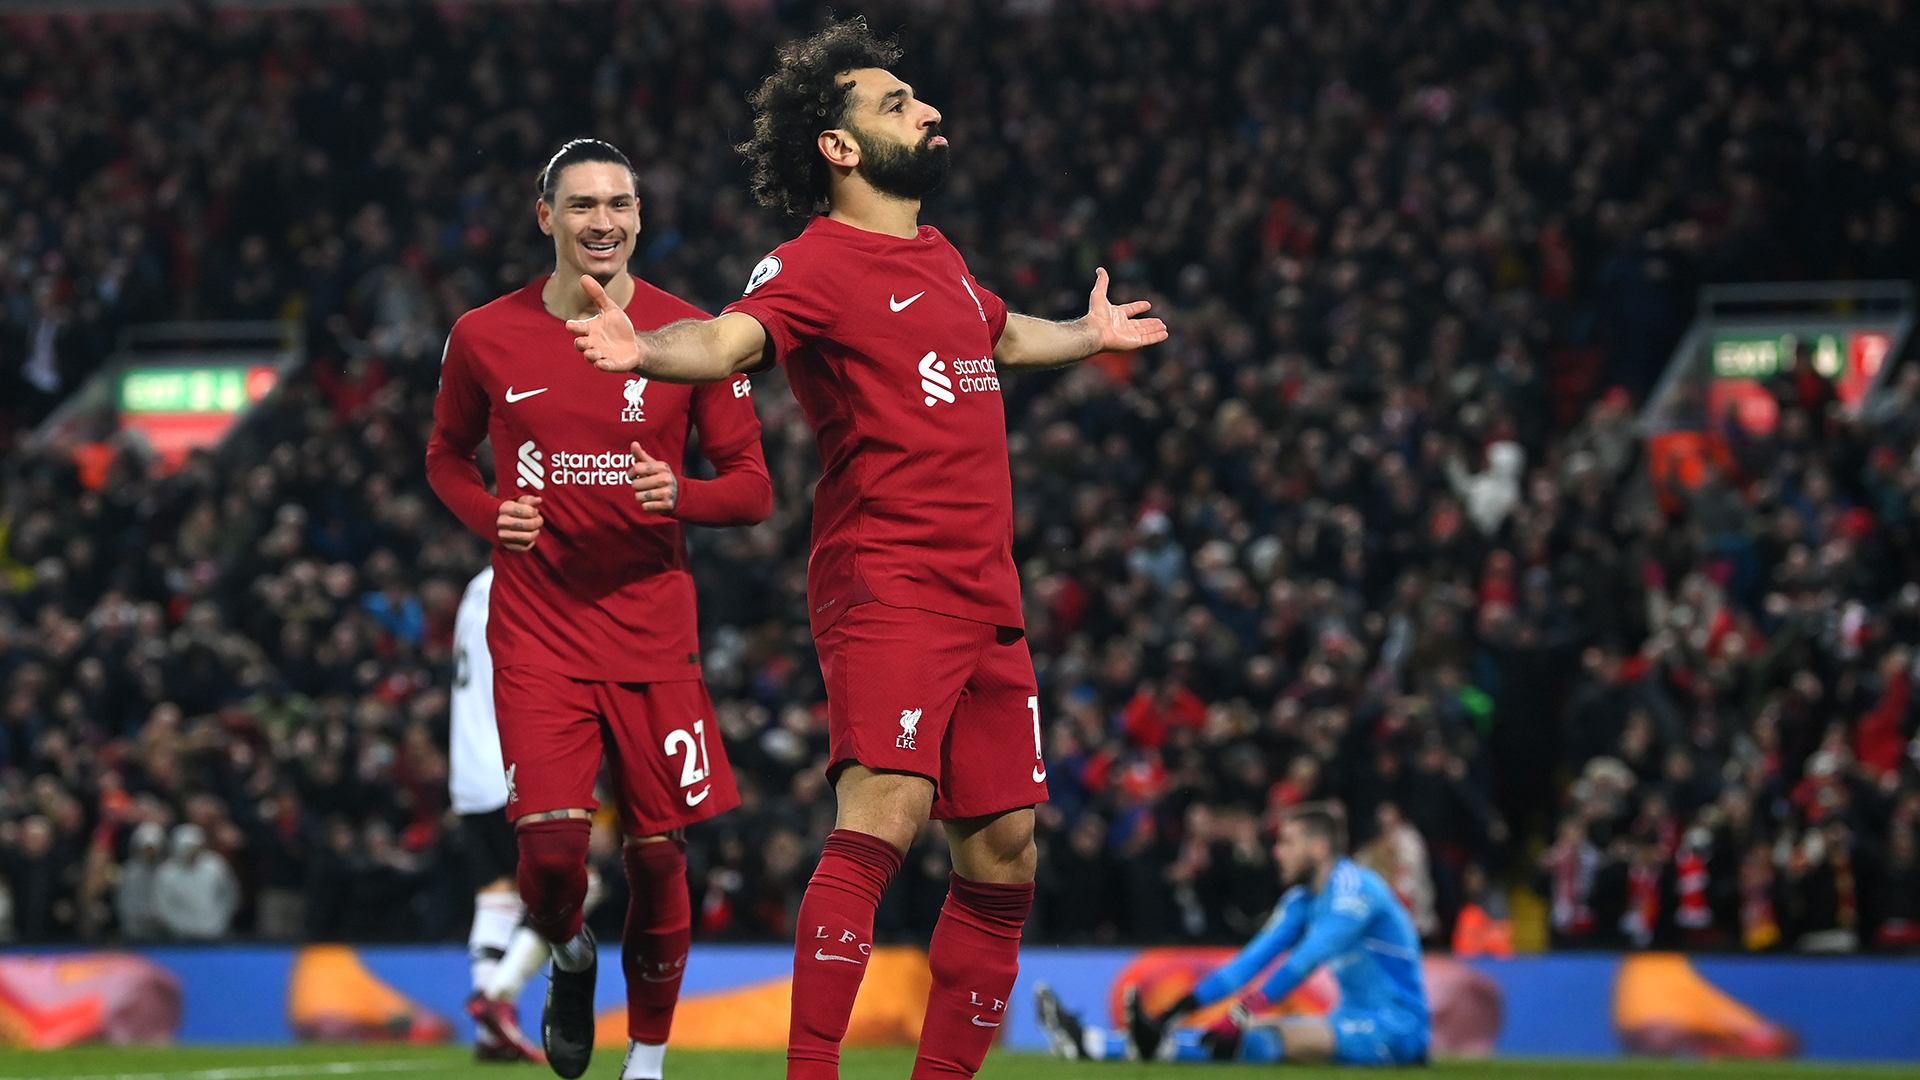 Mohamed Salah of Liverpool celebrates after scoring the team's fourth goal during the Premier League match between Liverpool FC and Manchester United at Anfield on March 05, 2023 in Liverpool, England.